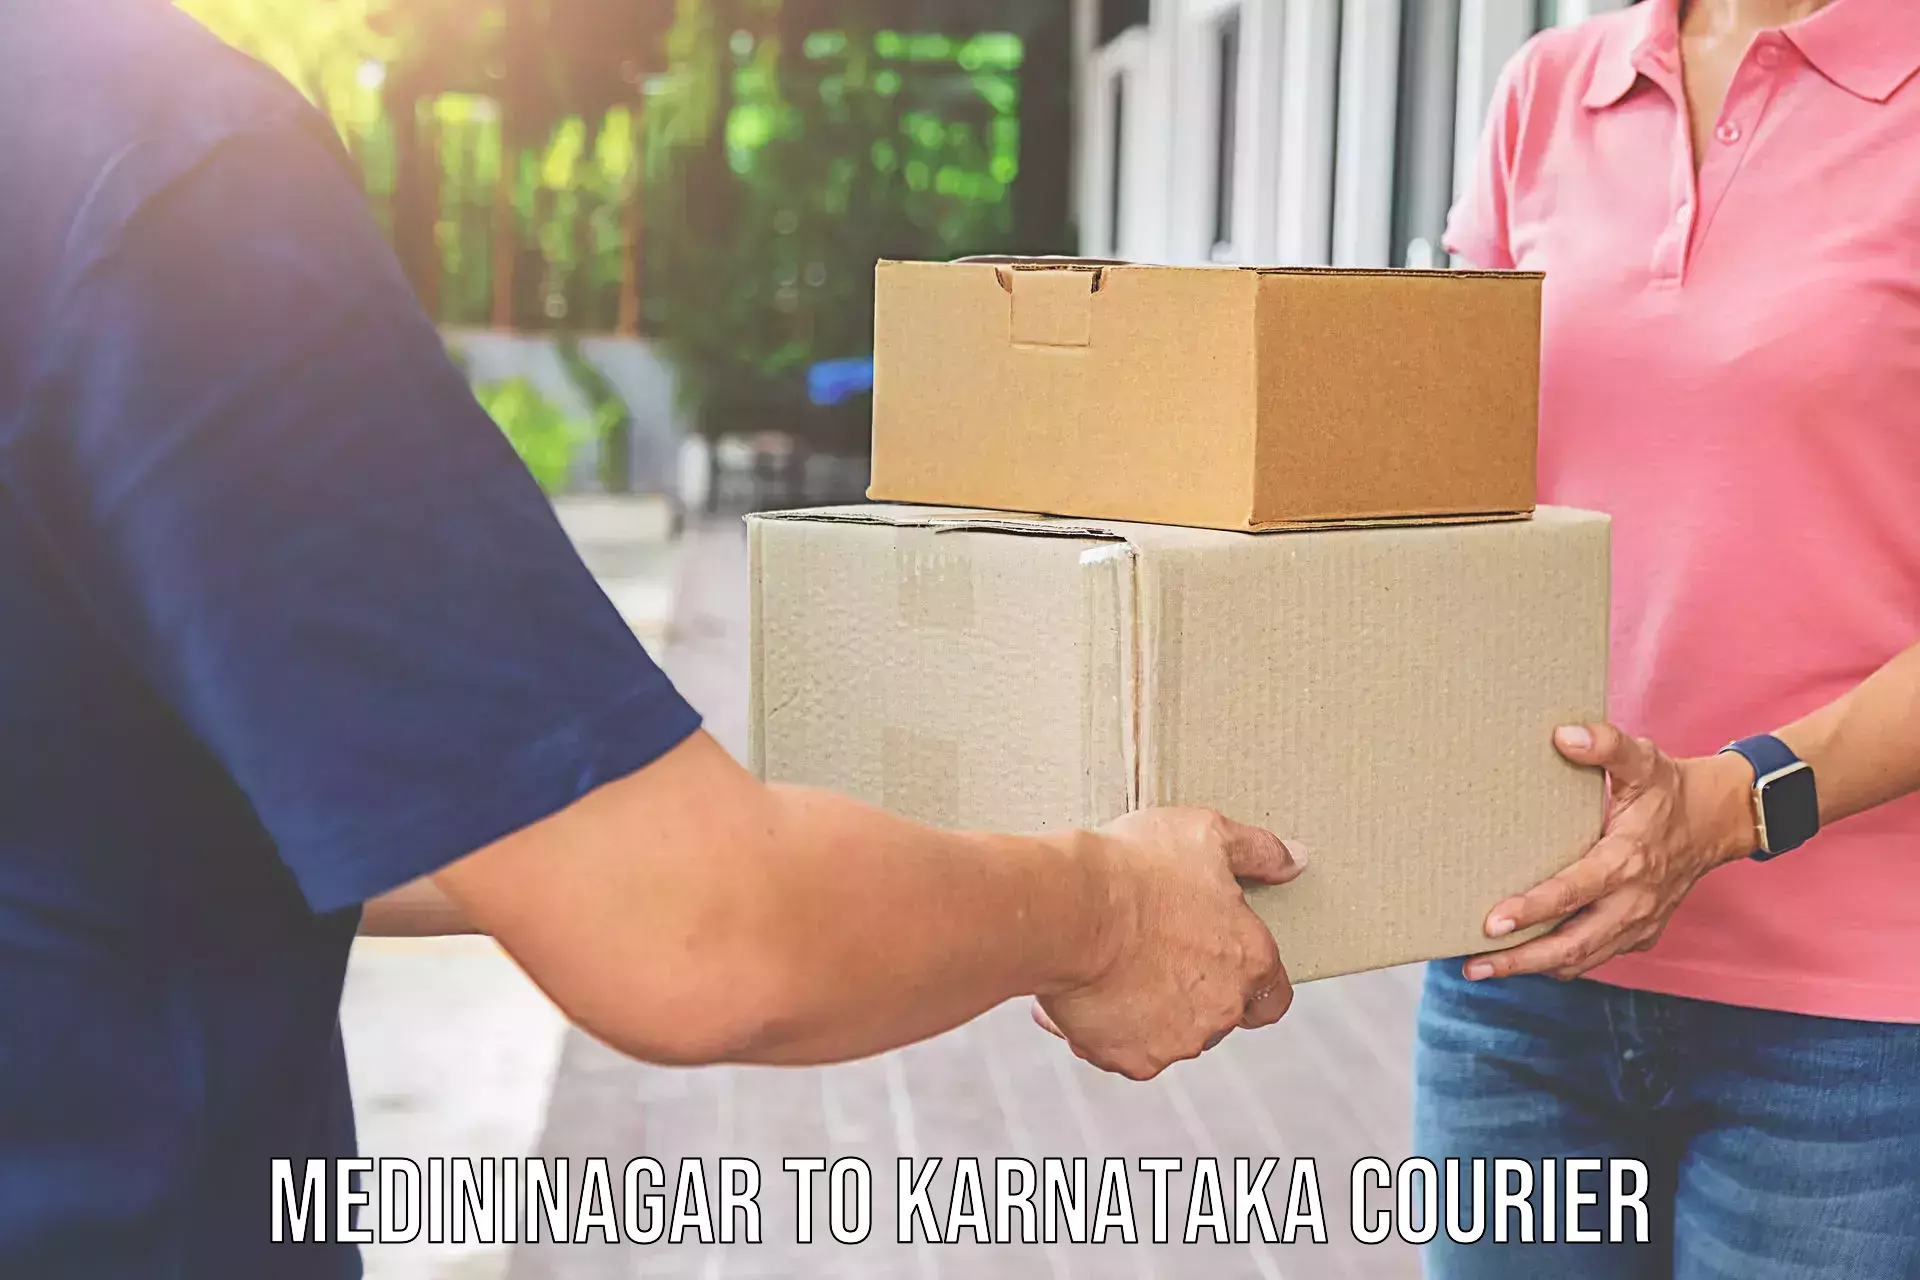 Quality relocation services Medininagar to Manipal